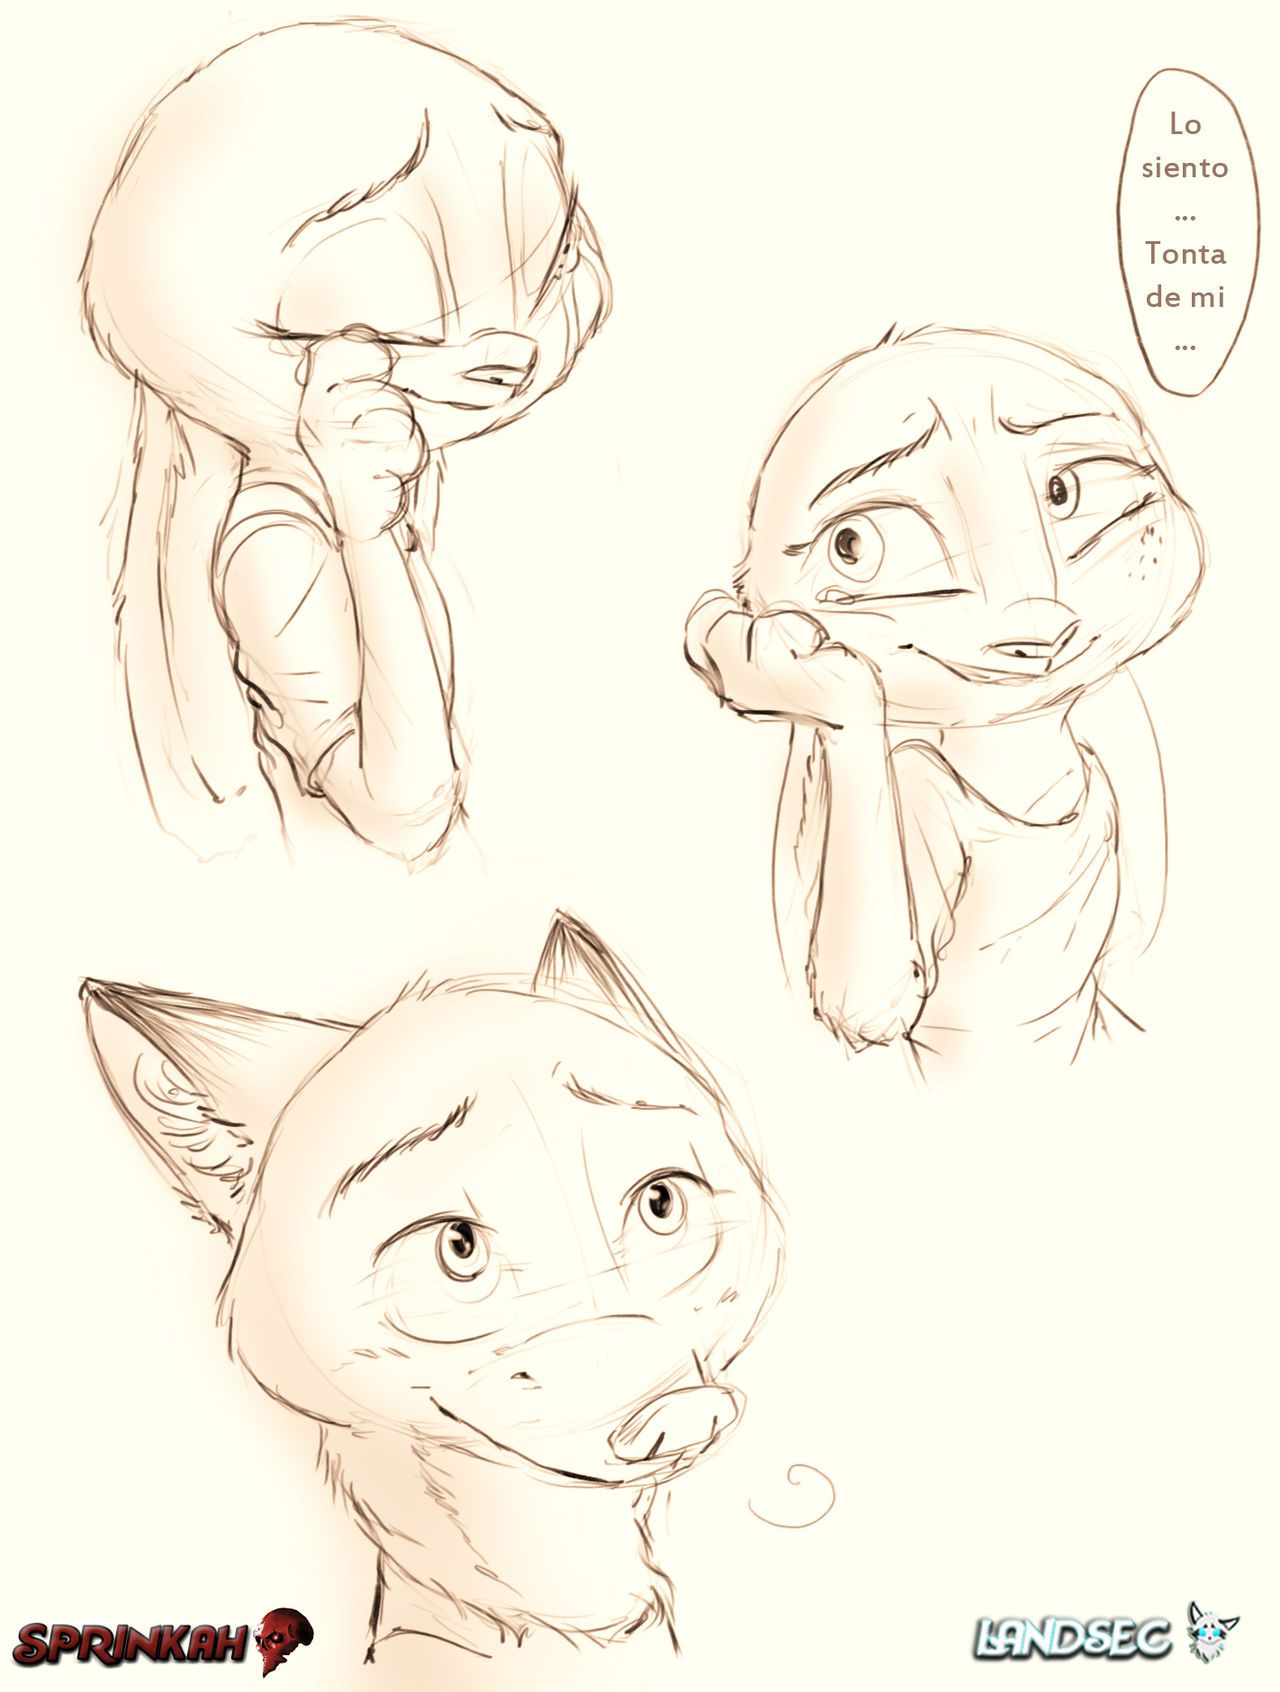 [Sprinkah] This is what true love looks like (Zootopia) (Spanish) (On Going) [Landsec] http://sprinkah.tumblr.com/ 46